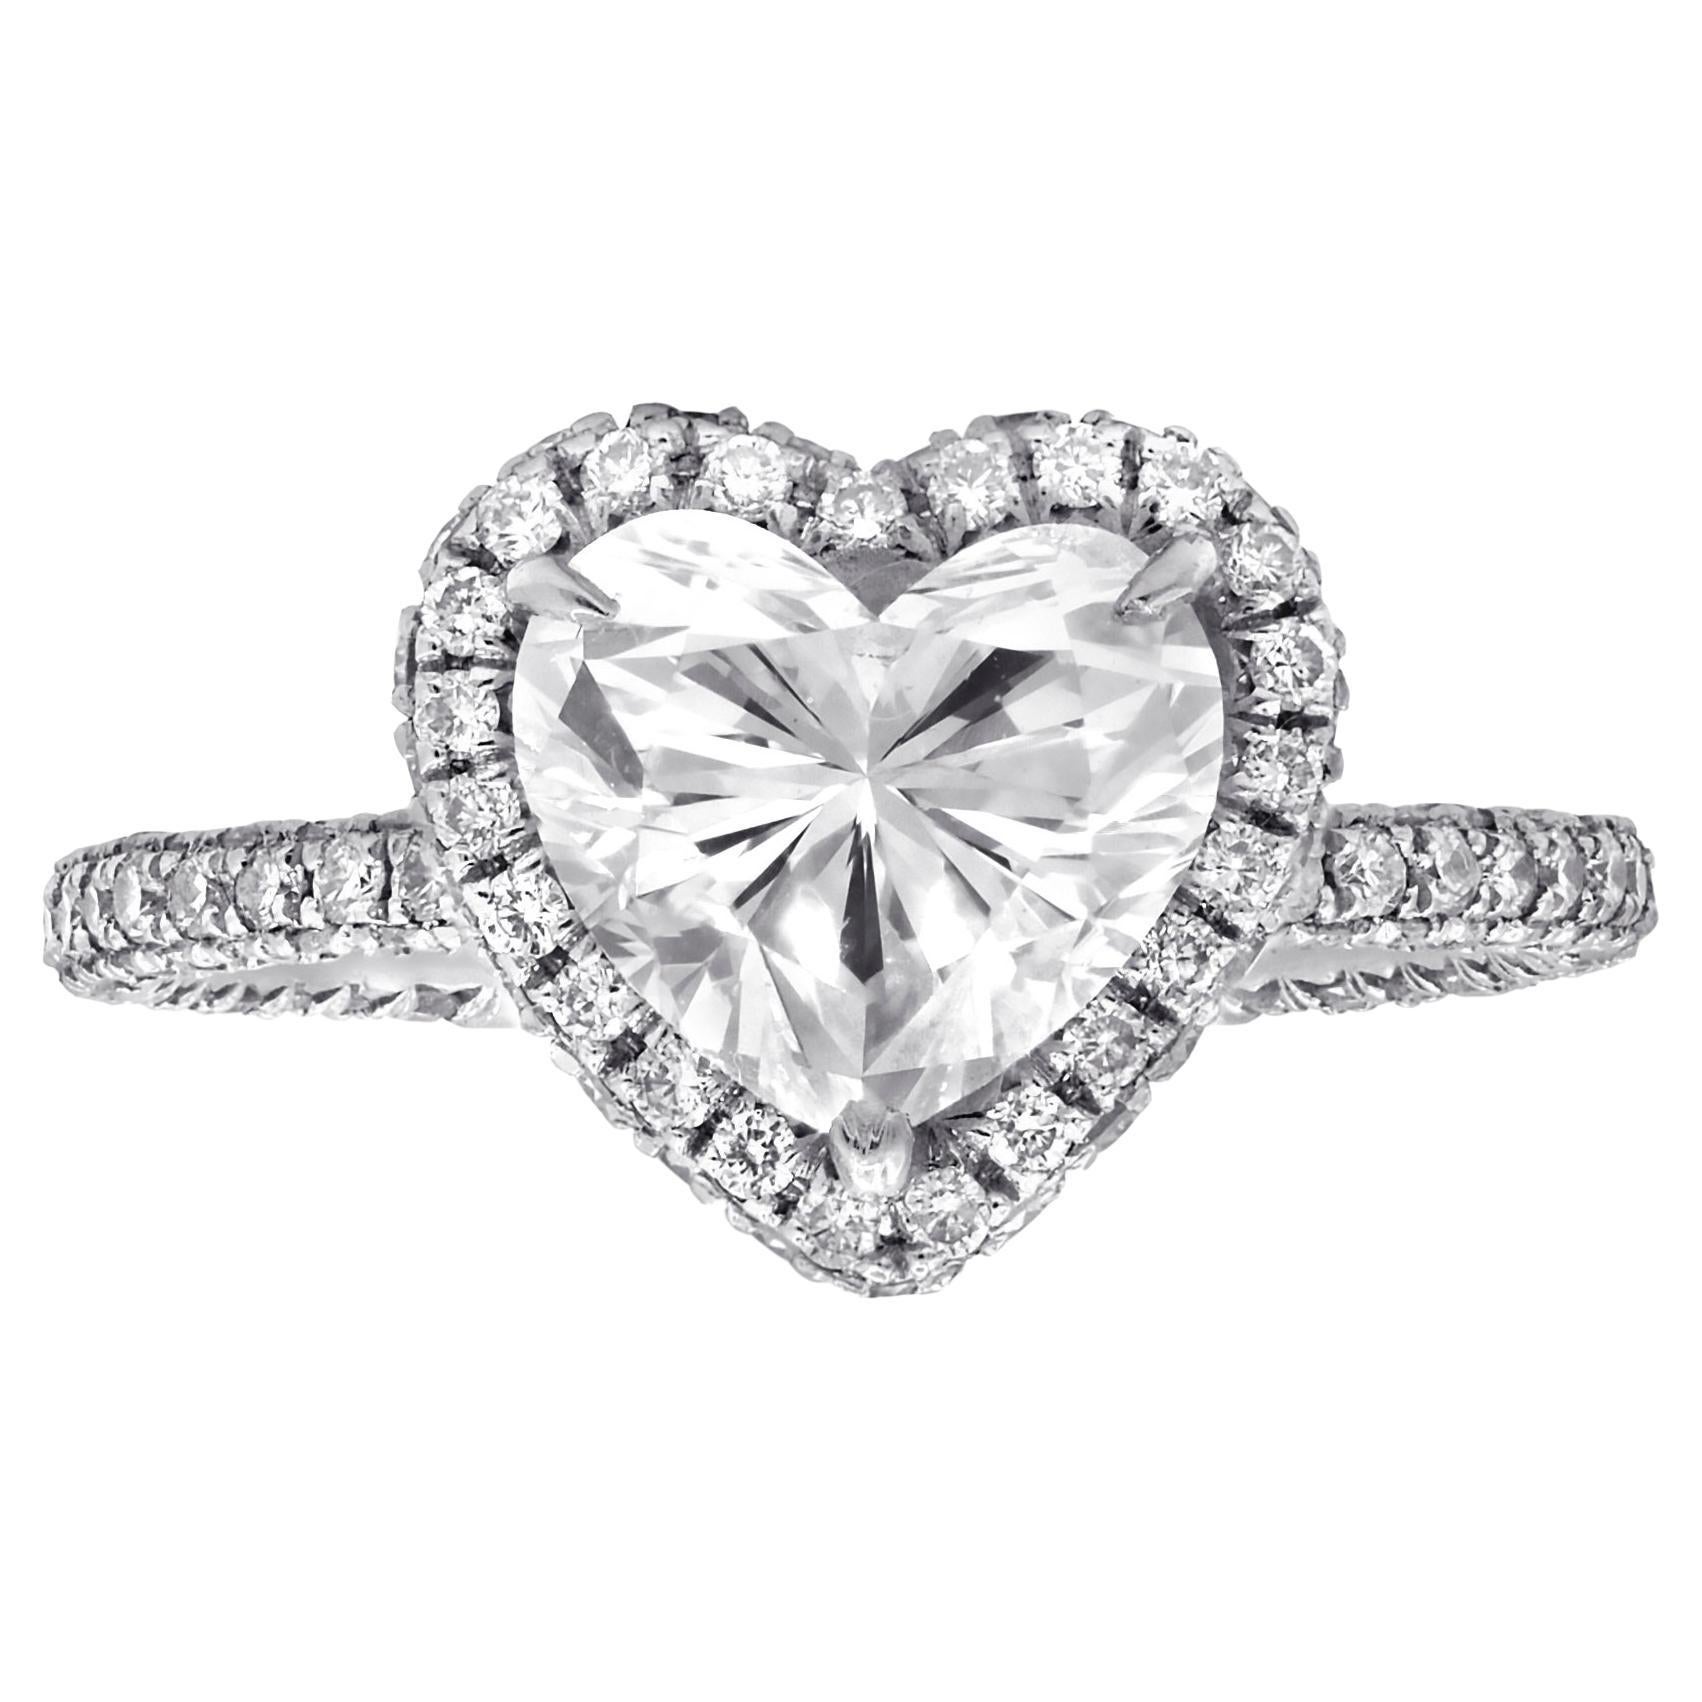 DIANA M. Platinum engagement ring featuring a center (G-SI2) 2.01 ct heart 